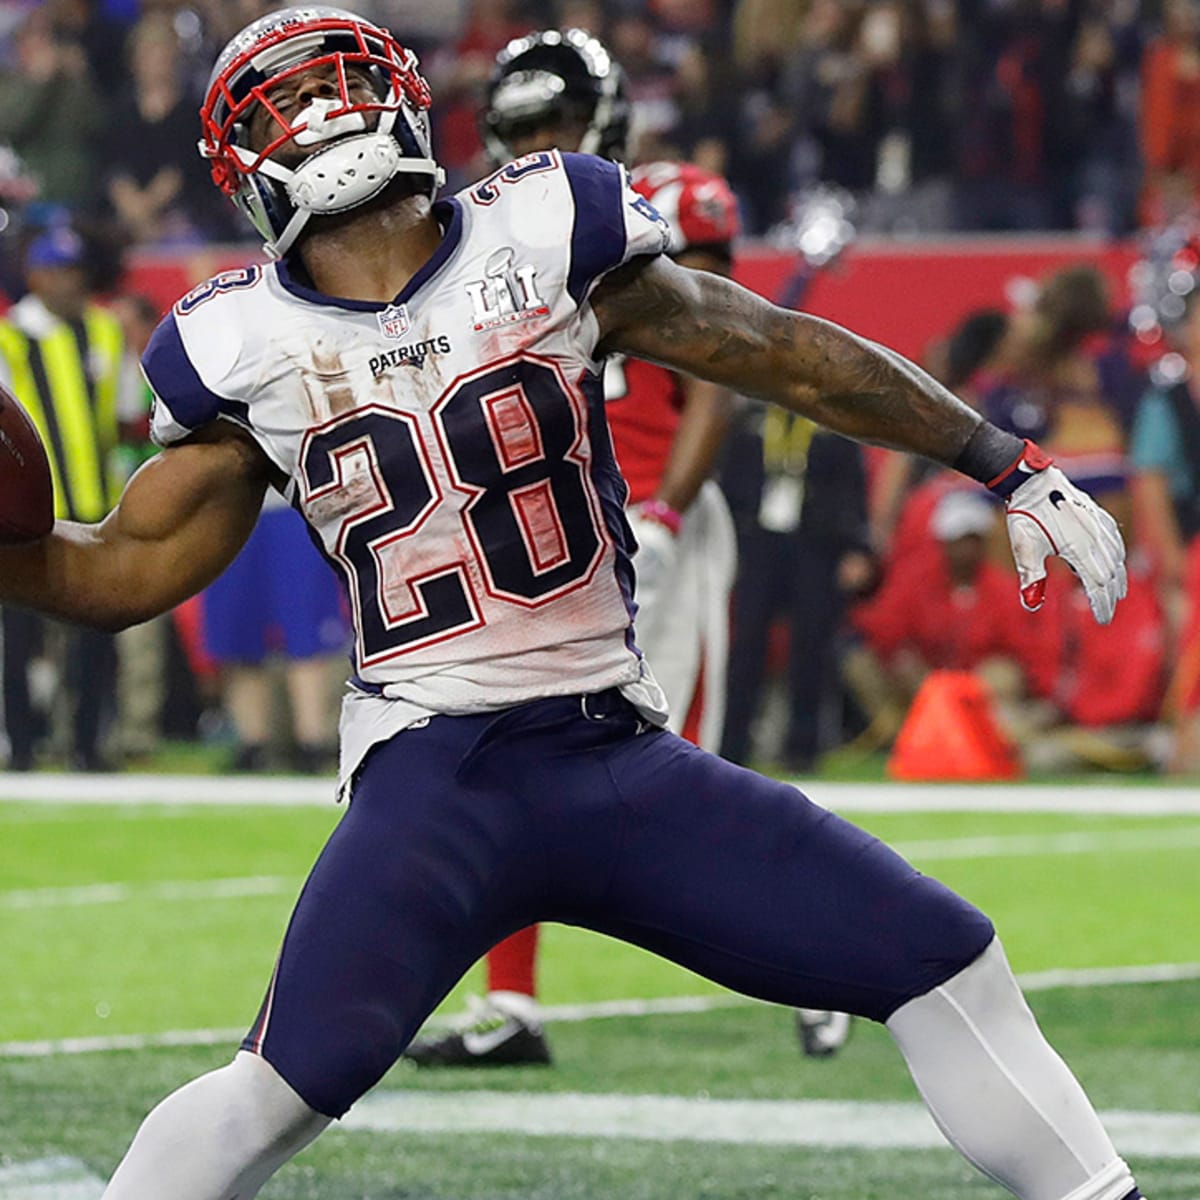 Official website of the New England Patriots, james white HD